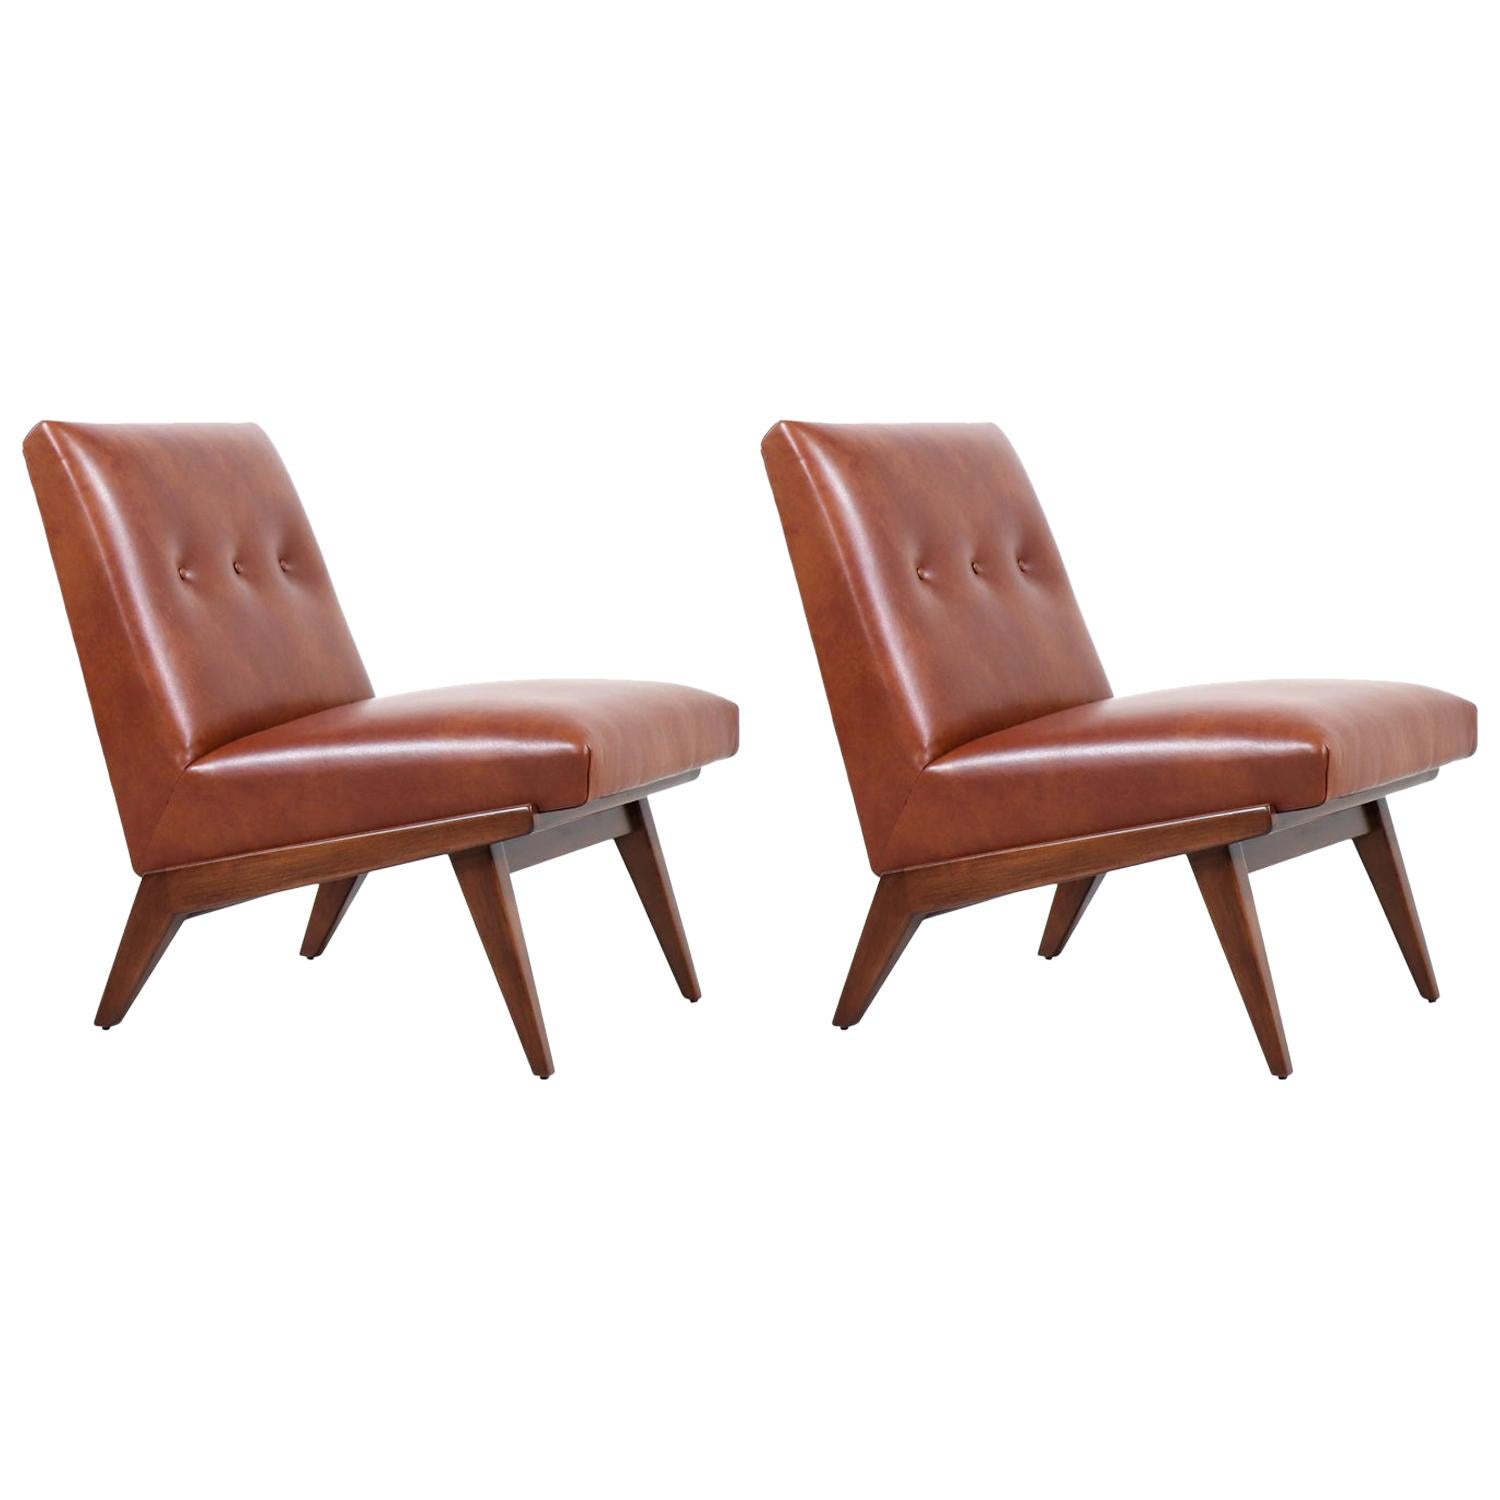 Jens Risom Cognac Leather Slipper Lounge Chairs for Knoll 